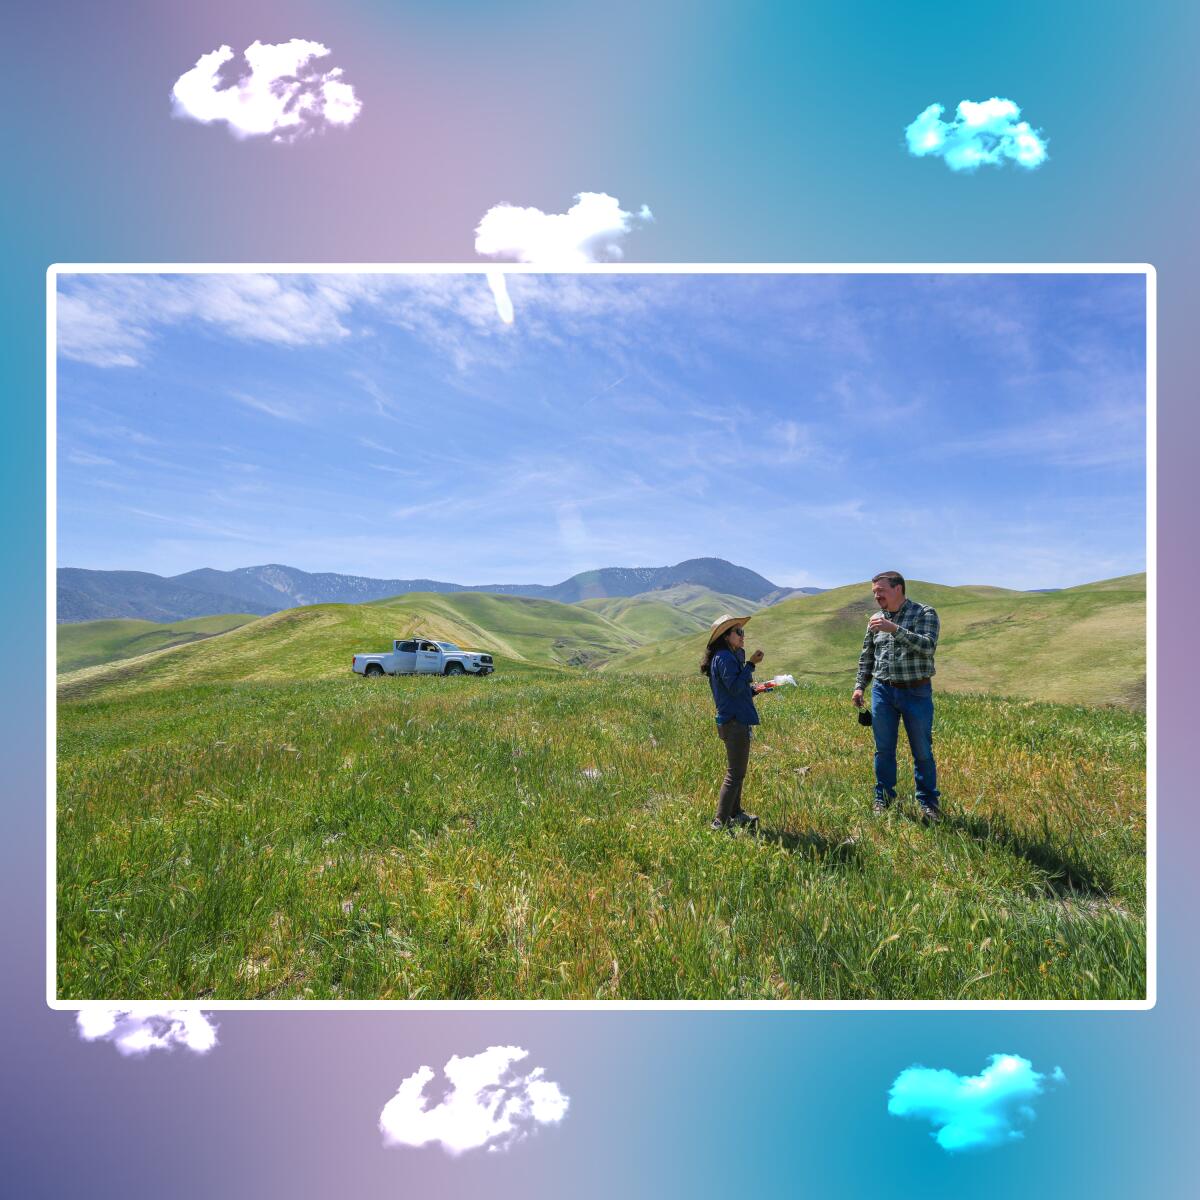 A man and a woman stand in a meadow with hills in the background.